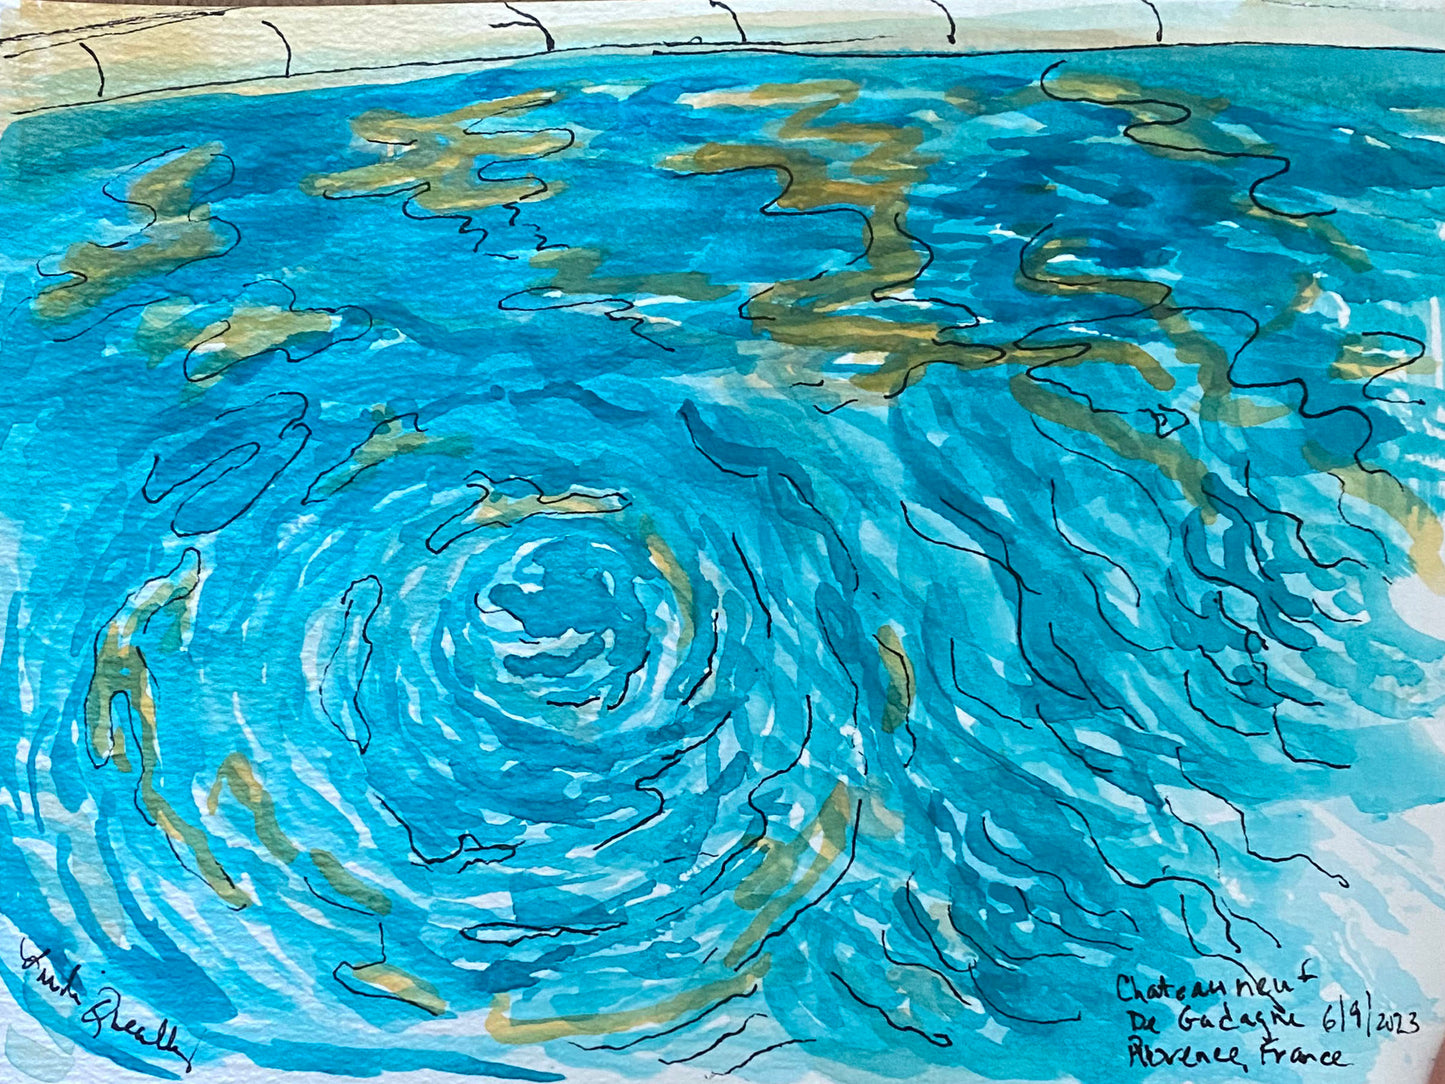 "Chateauneuf-de-Gadagne" Swimming Pool Sketch  #1